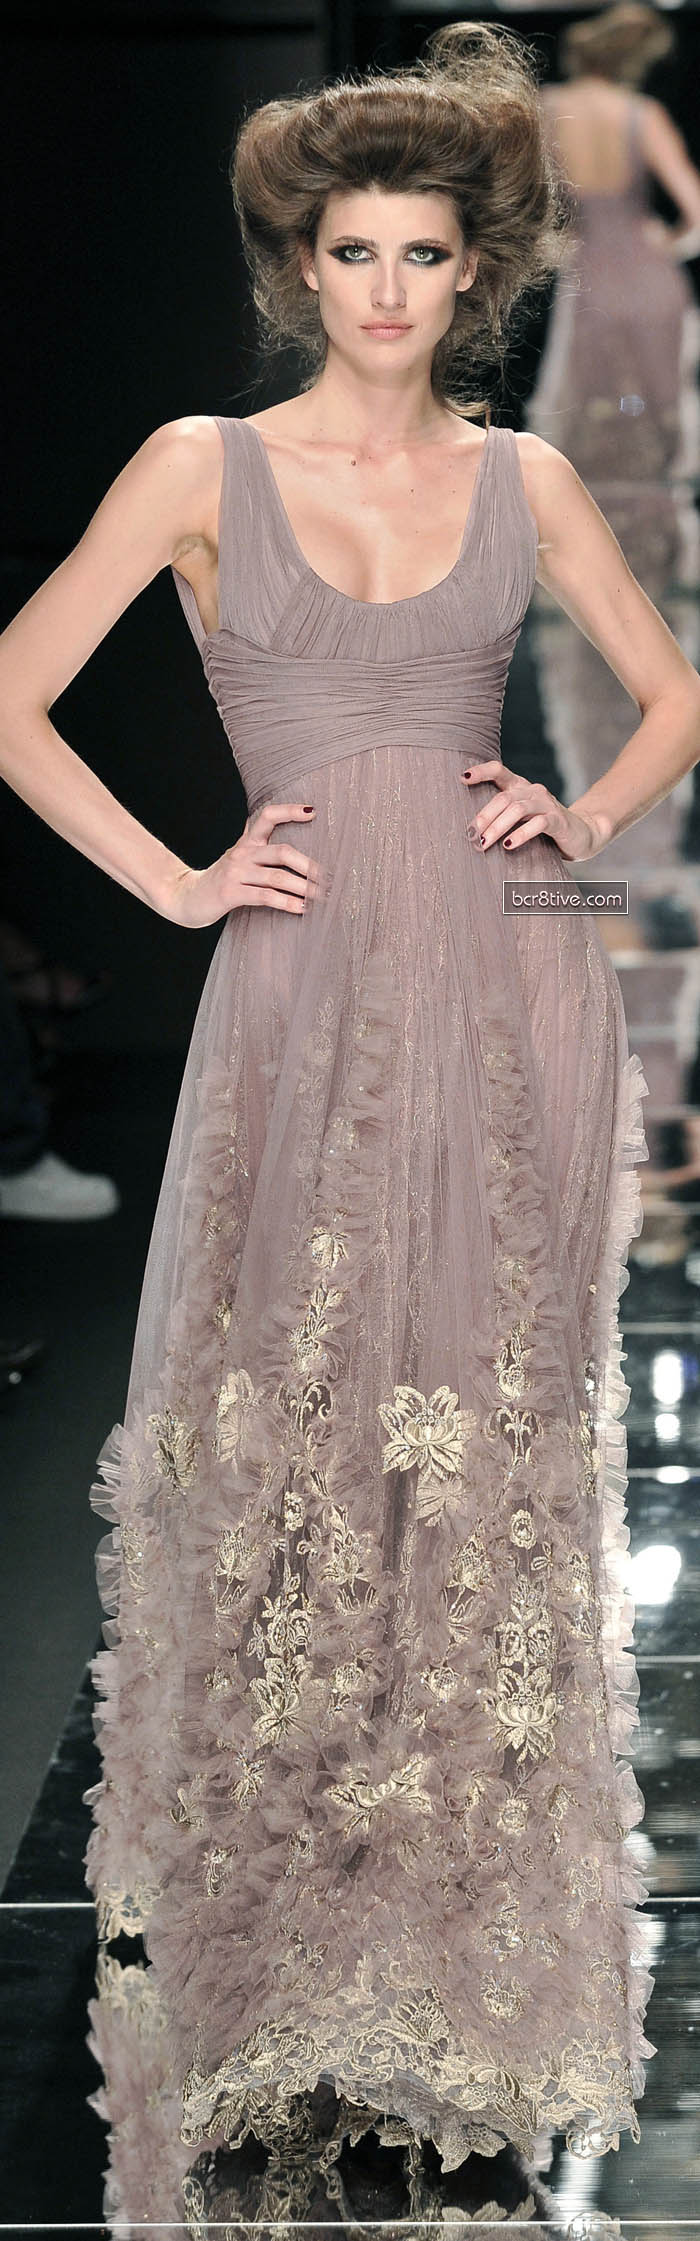 Elie Saab Fall Winter 2008 Haute Couture